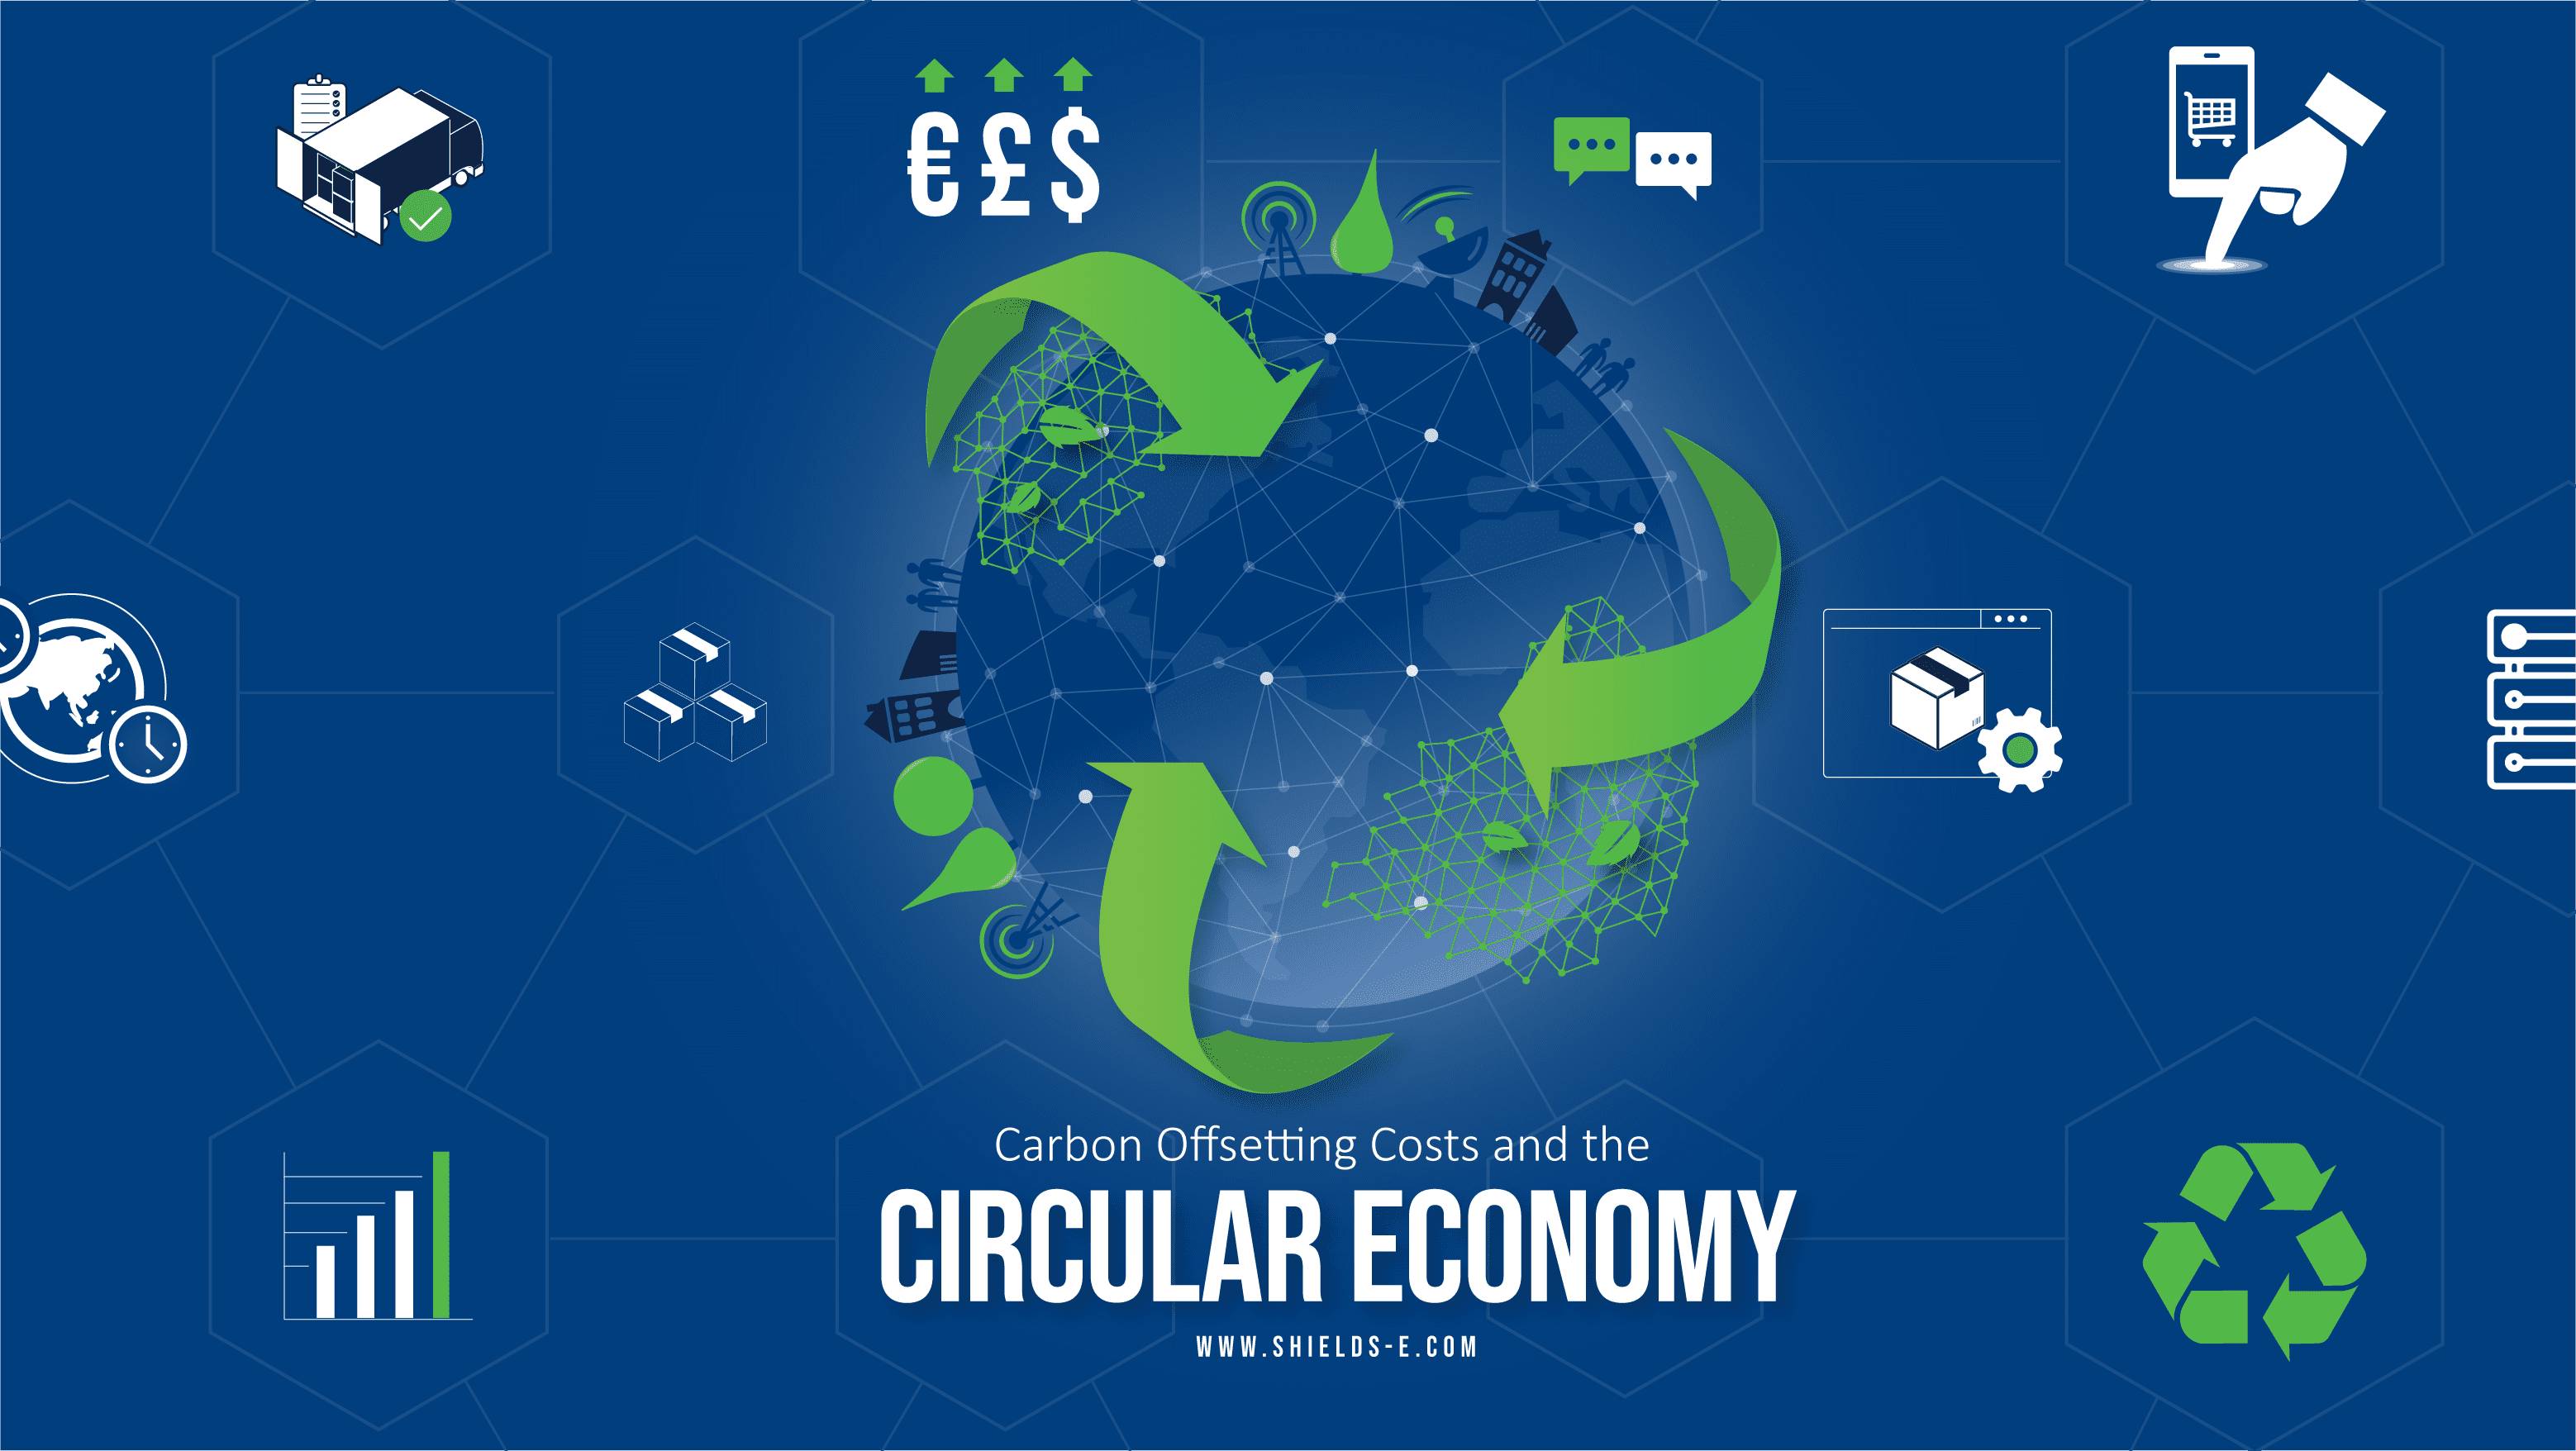 Carbon Offsetting Costs and the Circular Economy blog header image